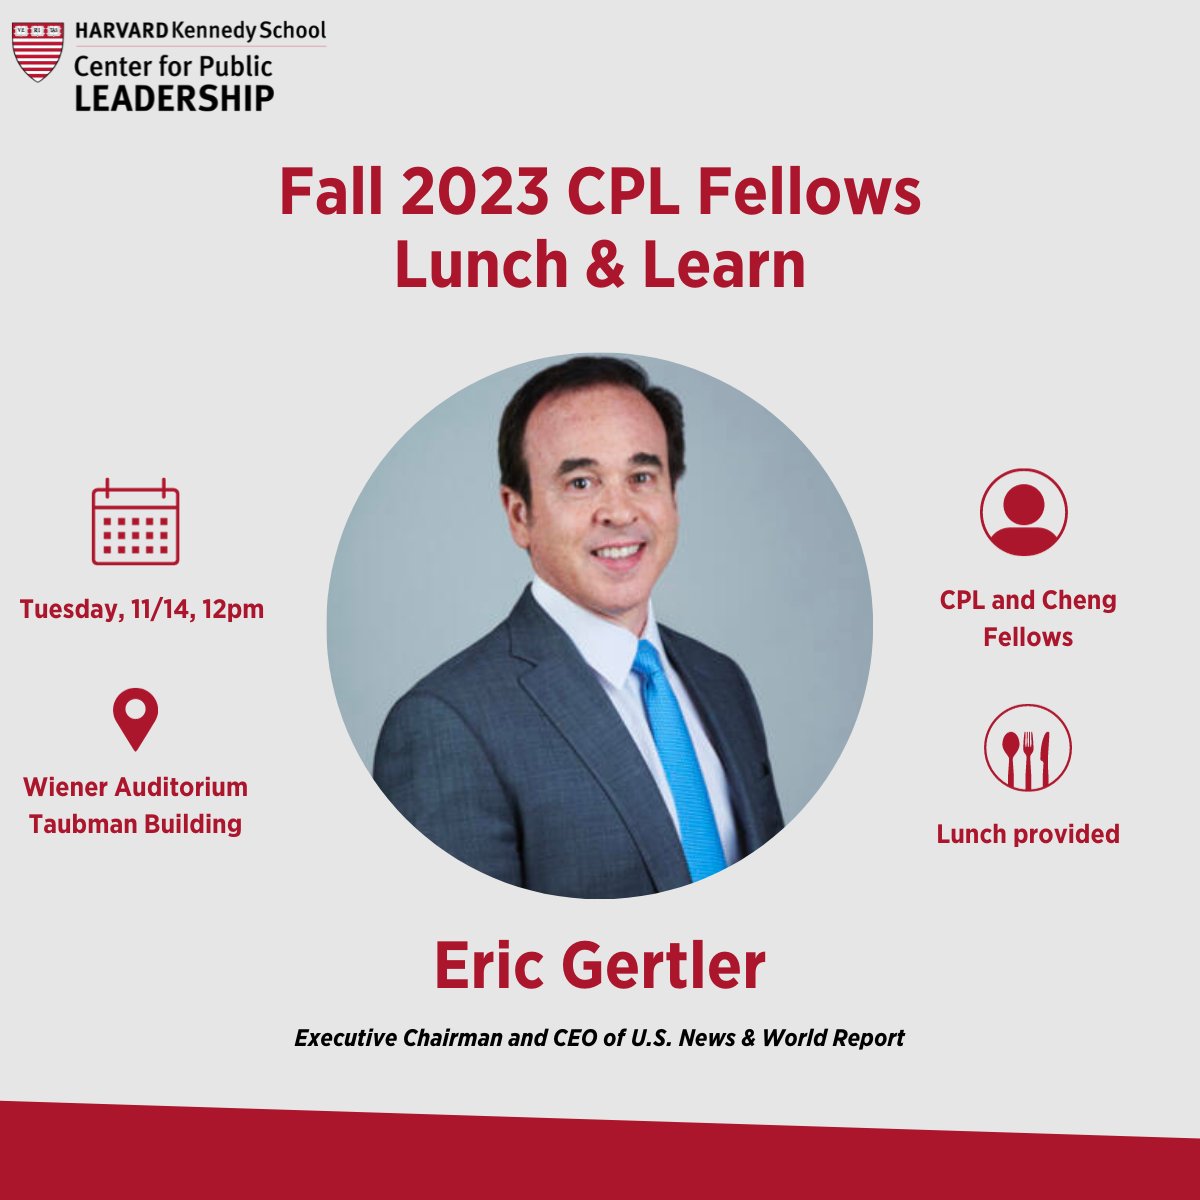 Next week, @HarvardCPL fellows and @SICIHarvard Cheng Fellows are invited to join a Lunch and Learn session with Eric Gertler, Executive Chairman and CEO of U.S. News & World Report and CPL Leadership Council member. cpl.hks.harvard.edu/event/lunch-le…